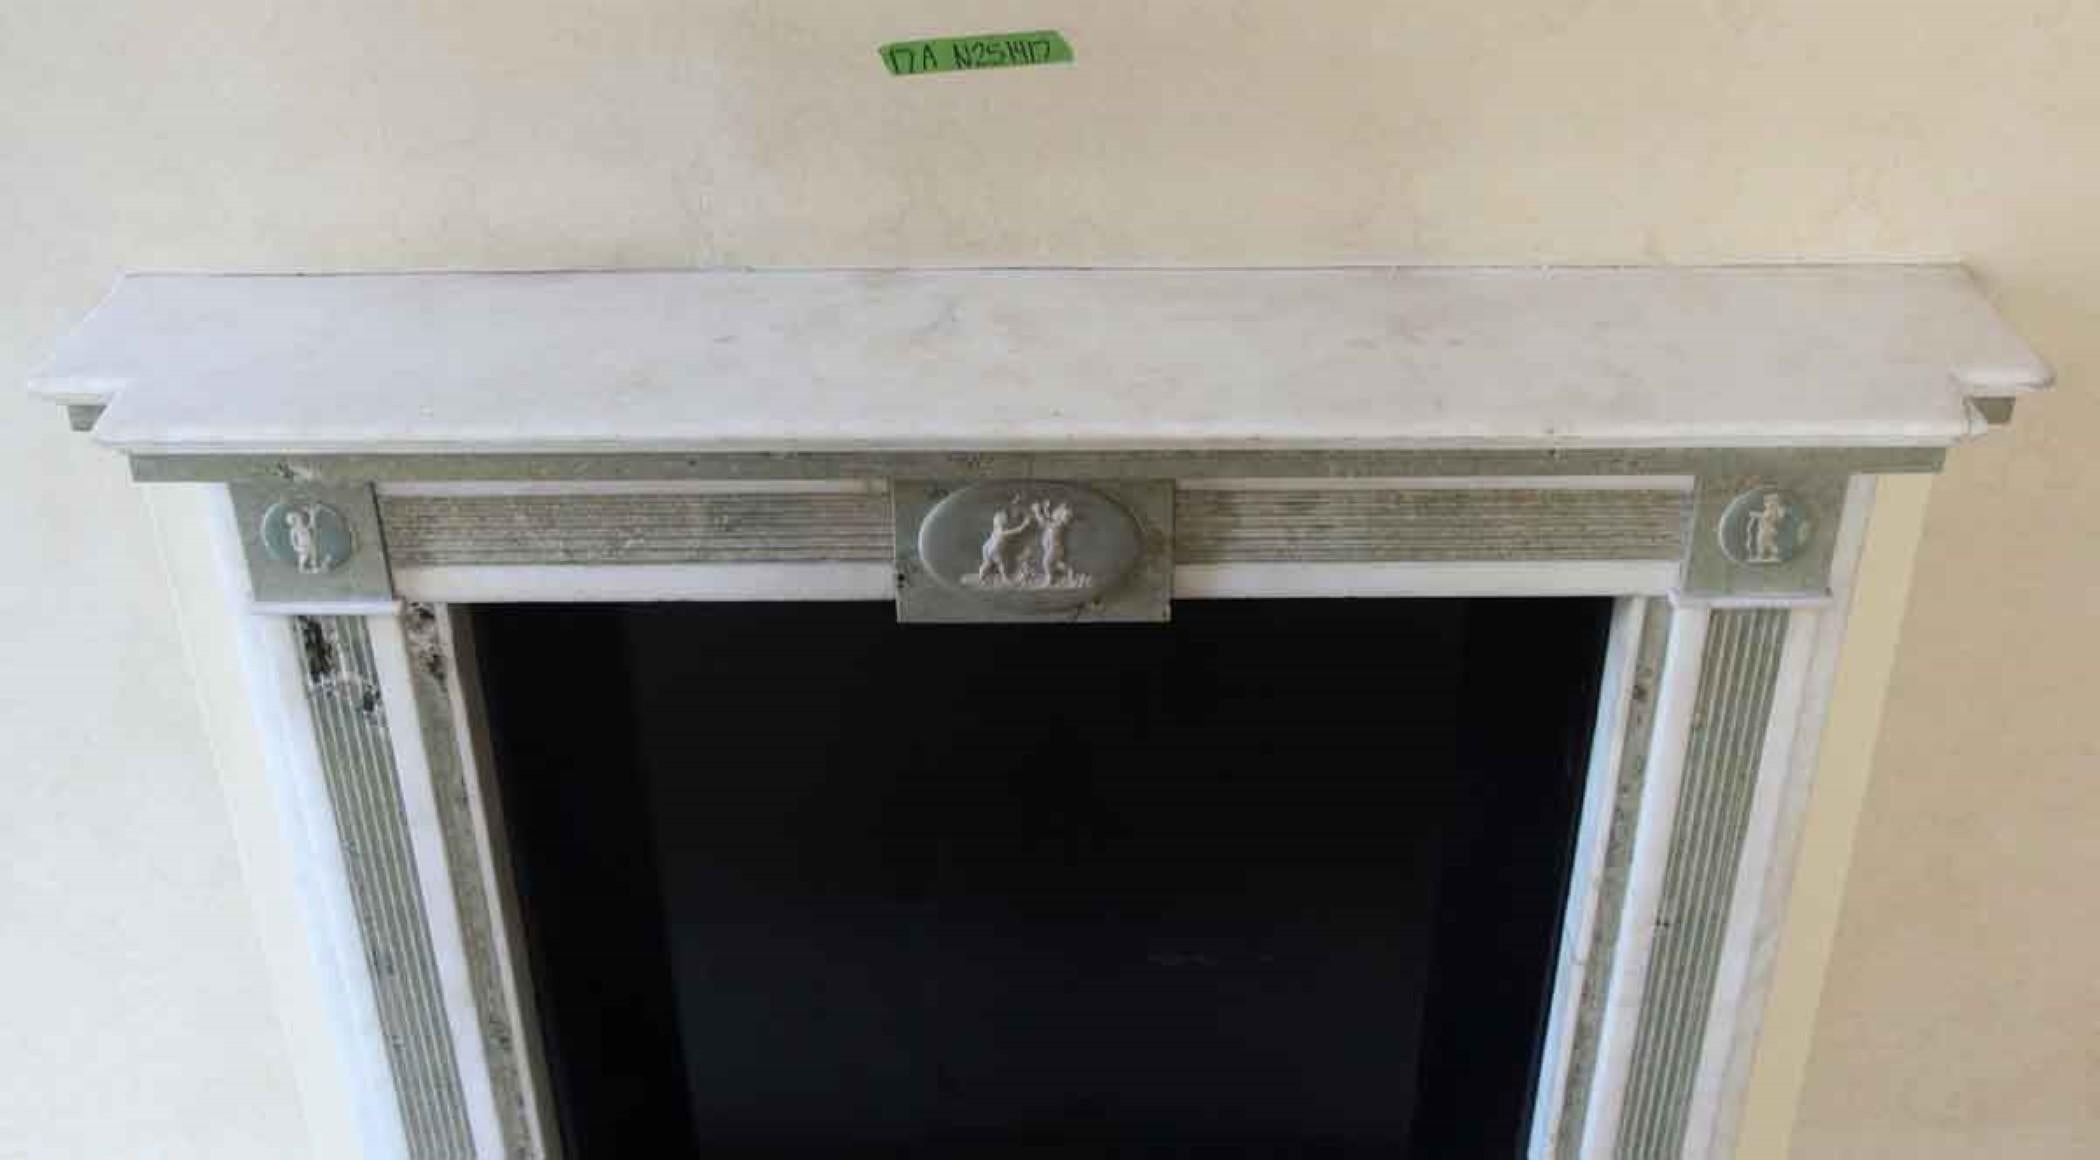 19th Century 1800s NYC Waldorf Astoria Hotel Mantel White and Green Marble Regency Style